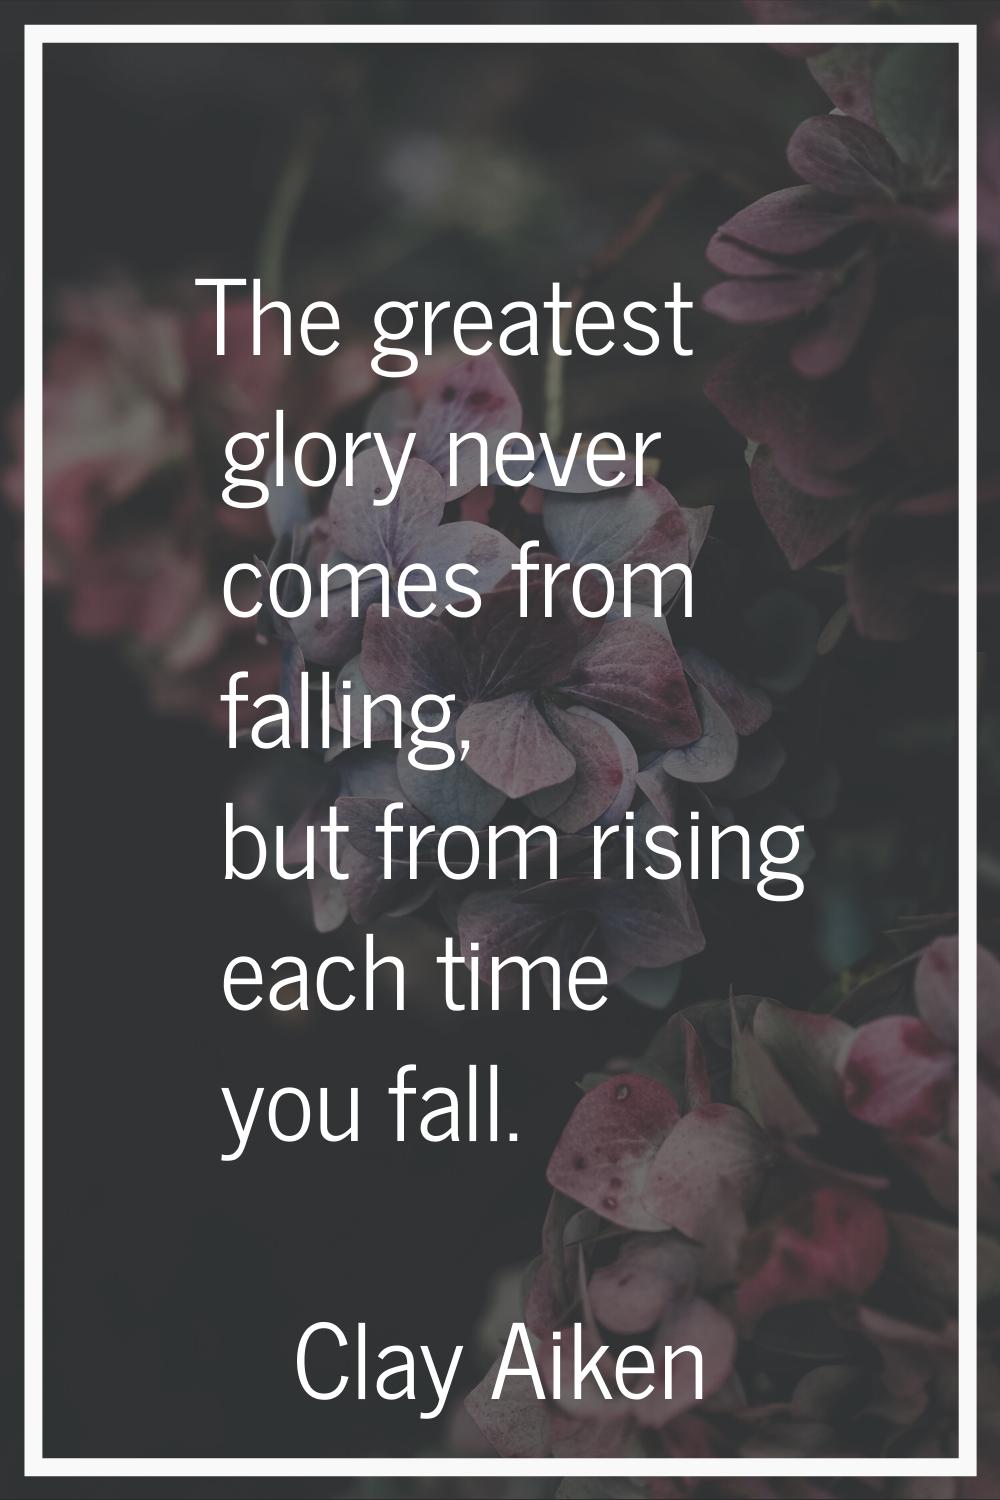 The greatest glory never comes from falling, but from rising each time you fall.